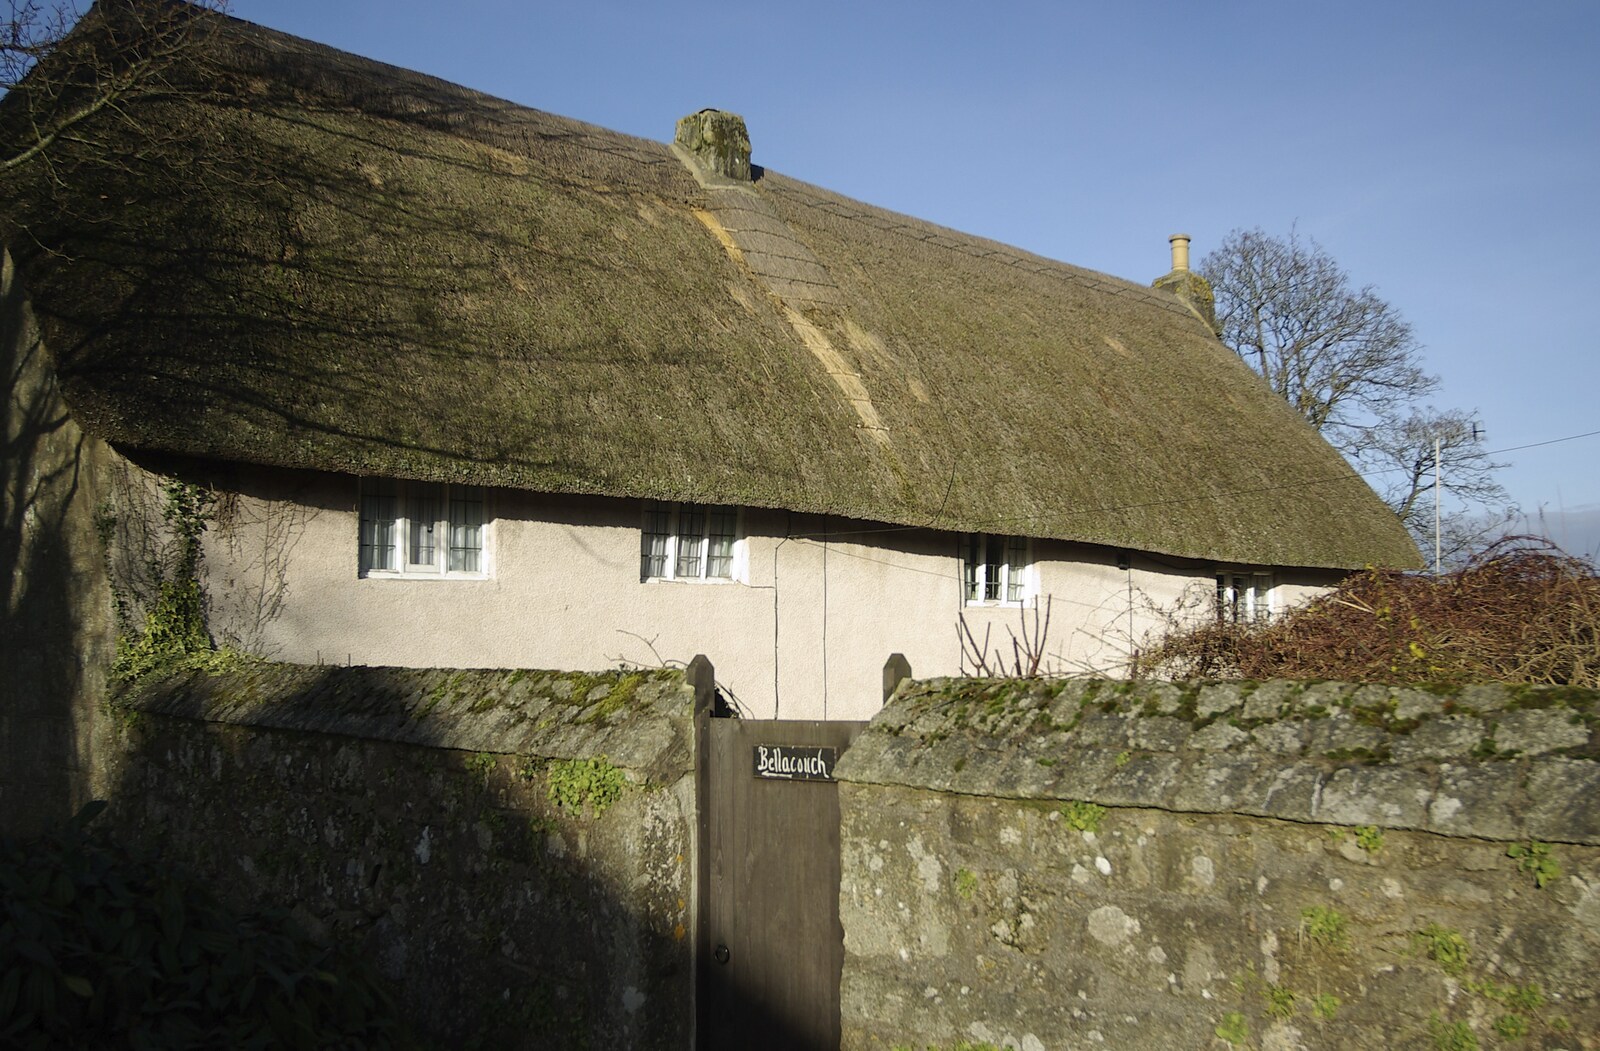 A thatched house from Matt's Allotment and Meldon Hill, Chagford, Devon - 26th December 2007